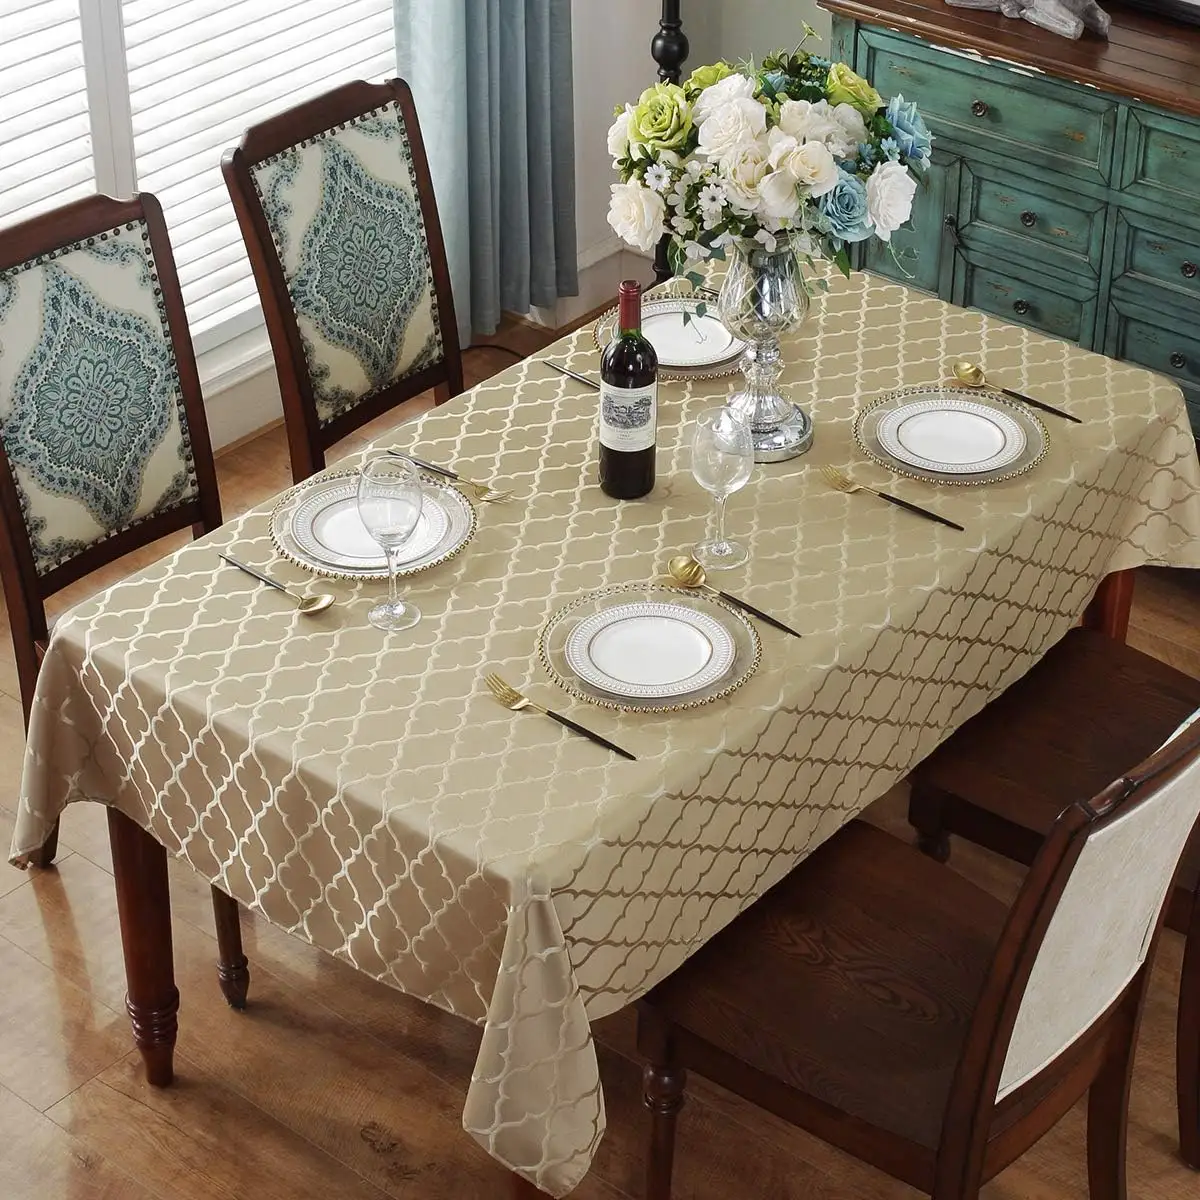 Skymoving New Jacquard Design Table Cloth Gold Kitchen Tablecloth for Decoration Tables 140gsm Polyester Waterproof Tablecloth